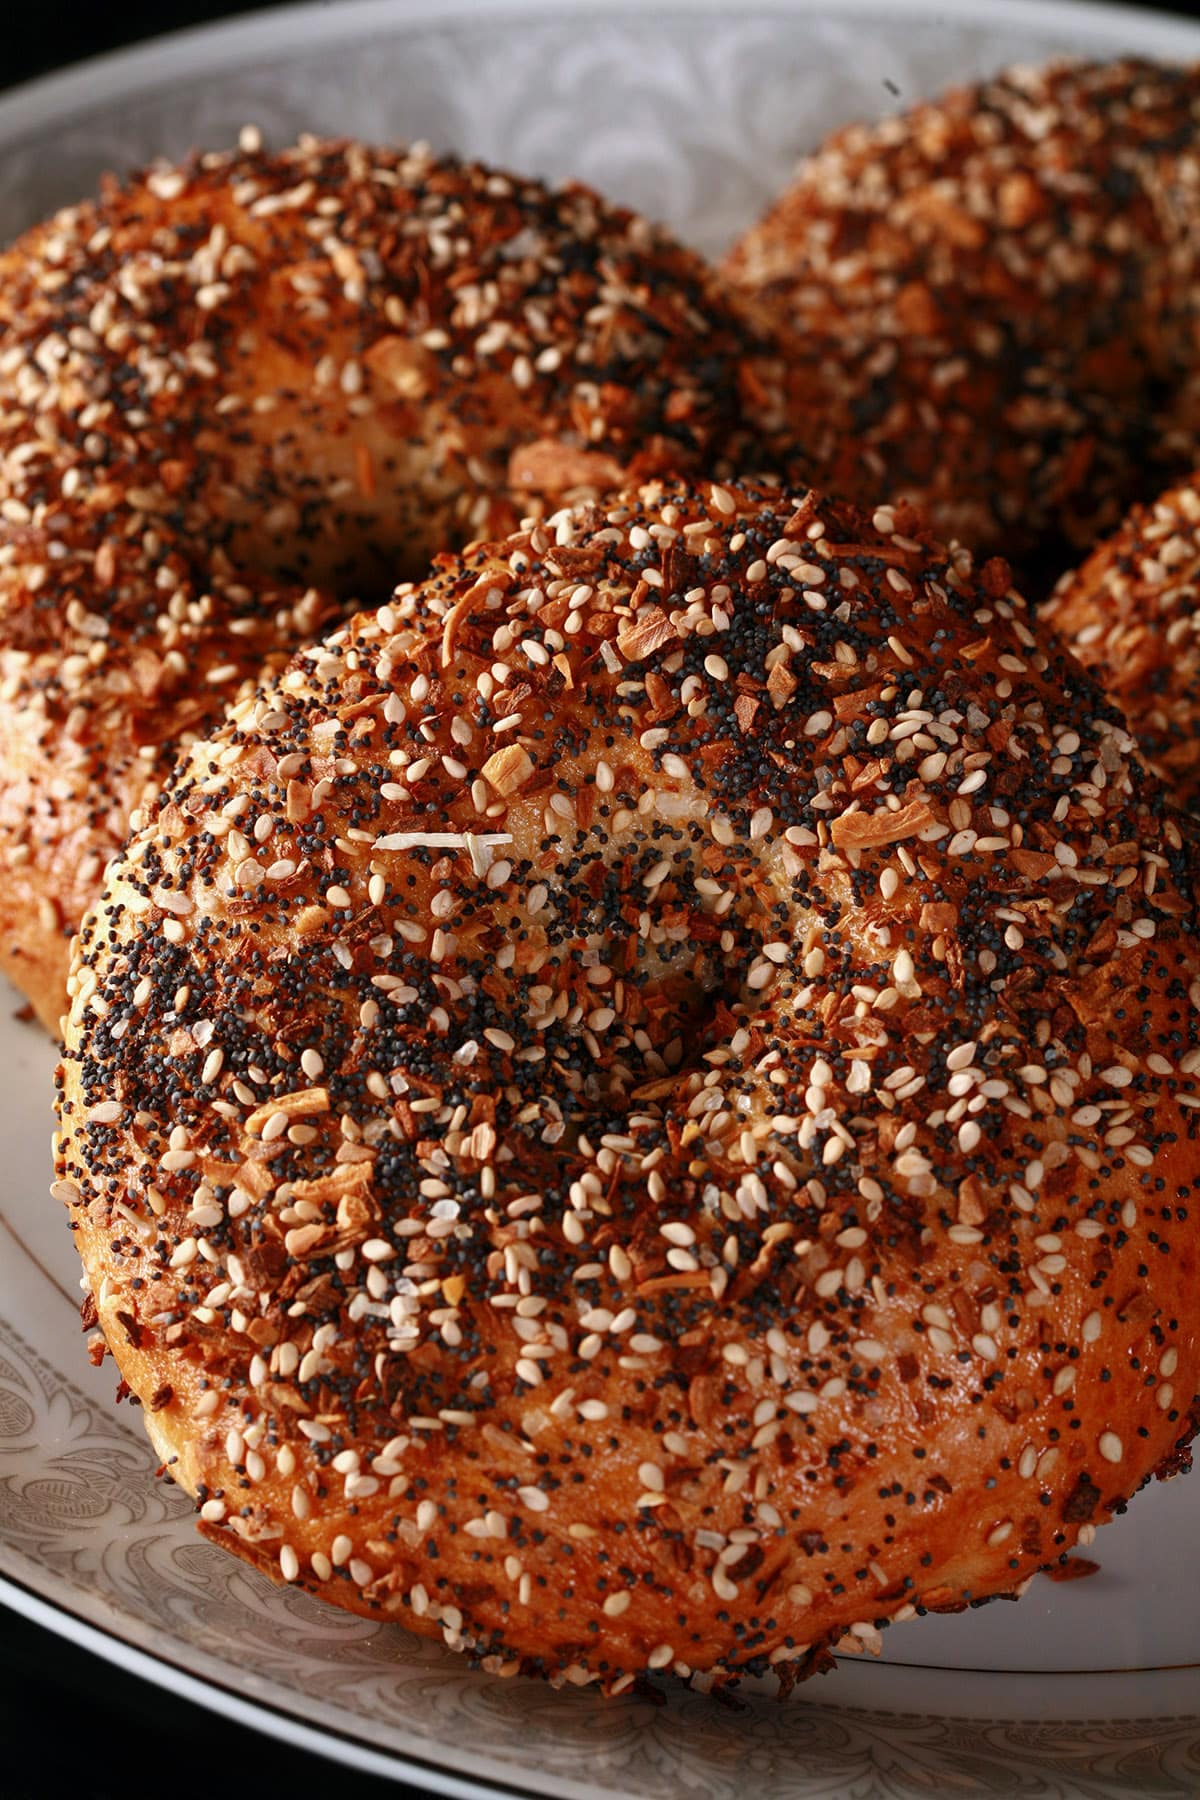 A plate of homemade everything bagels.